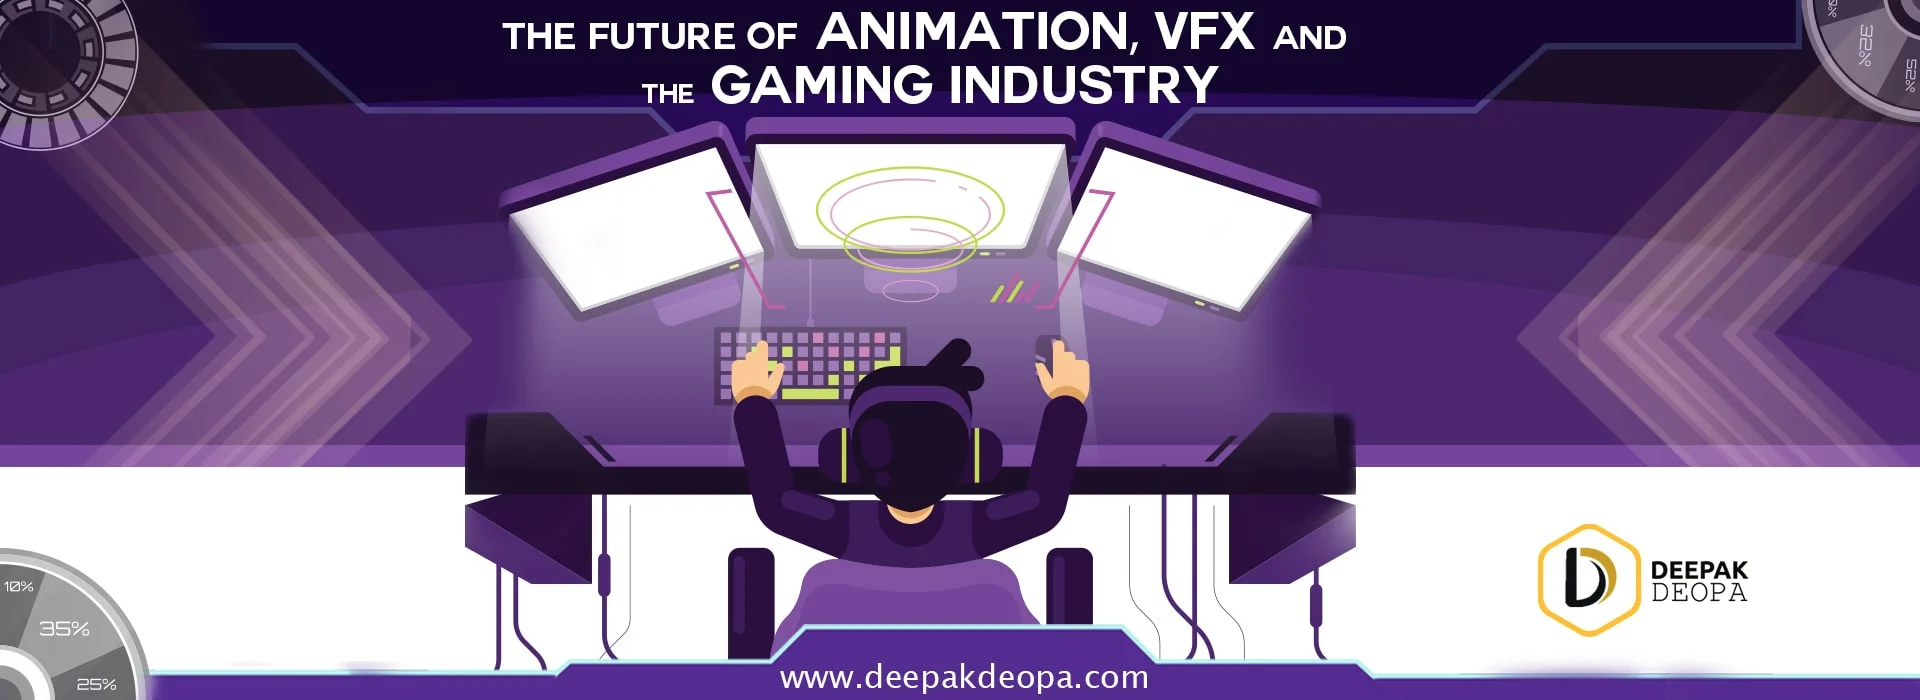 The Future of Animation, VFX and the Gaming Industry